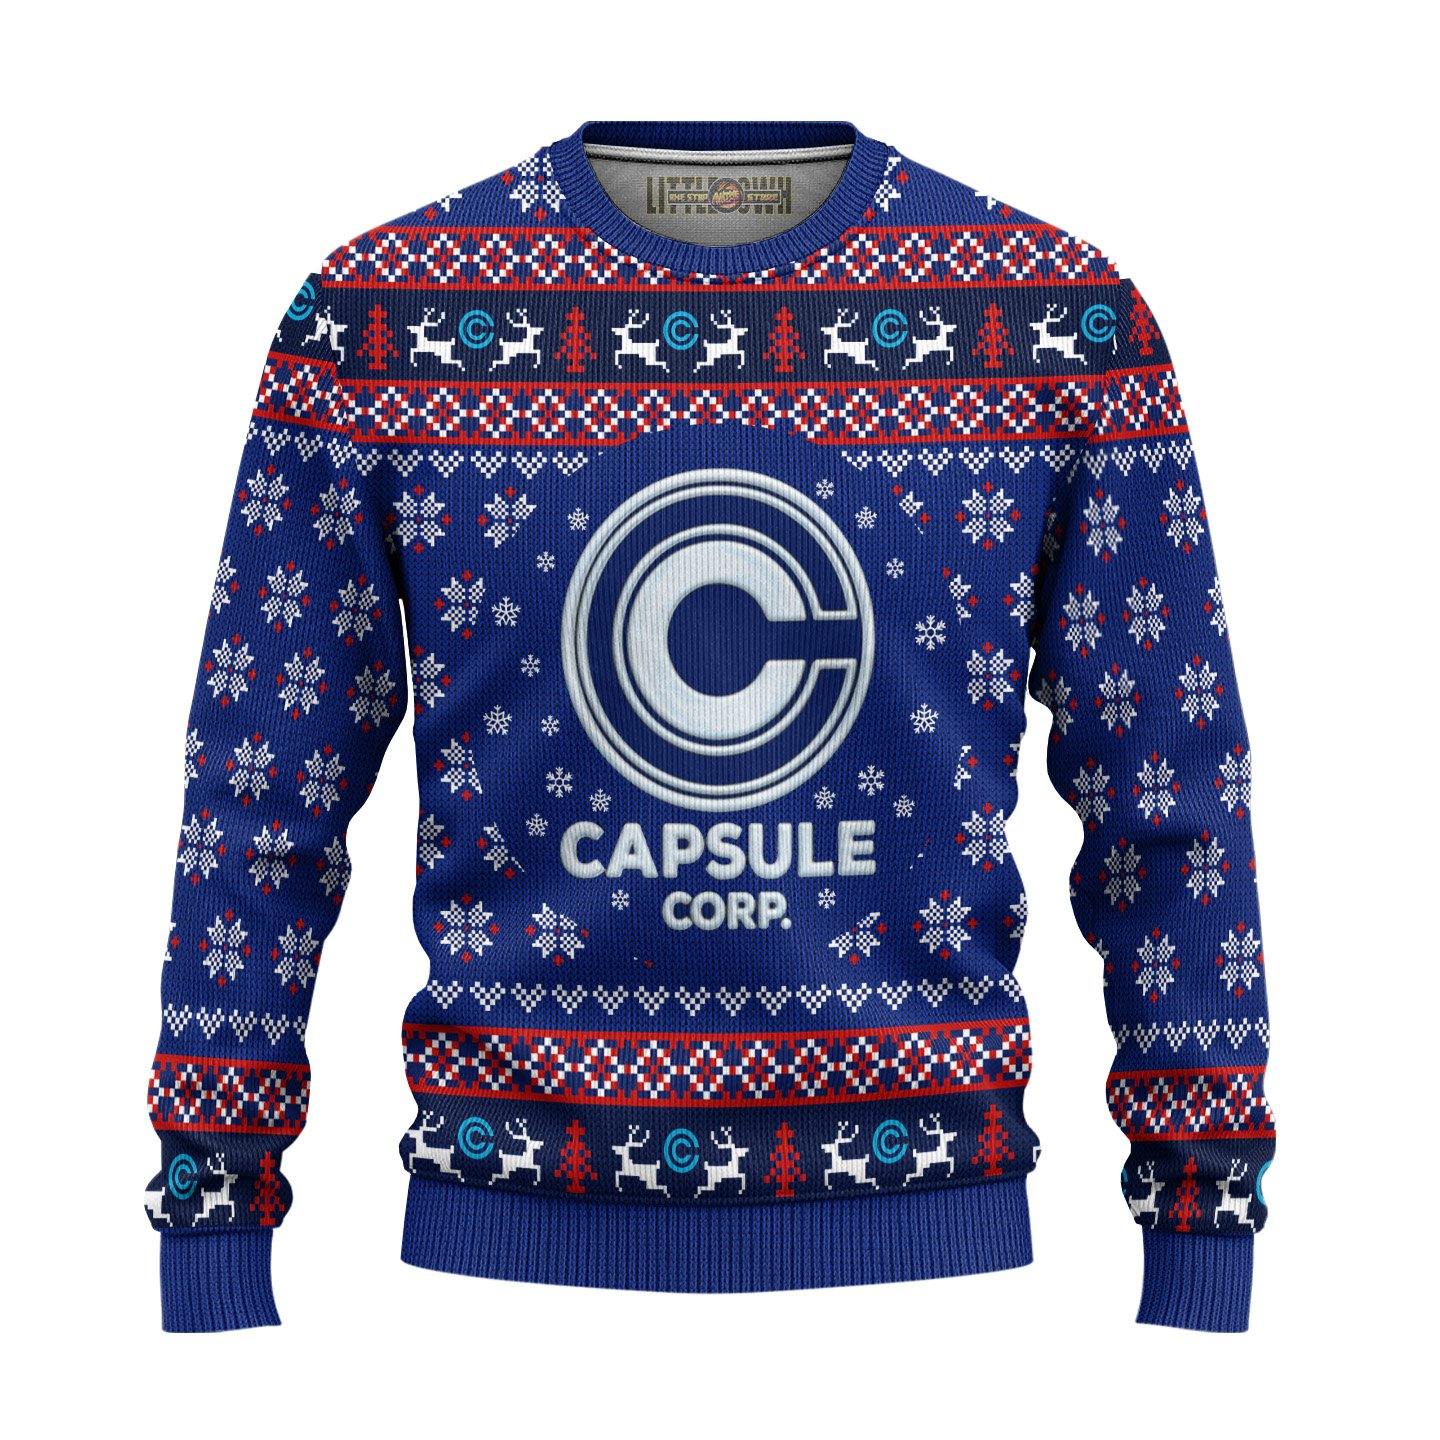 Capsule Corp Ugly Christmas Sweater Dragon Ball Anime Gift For Fans